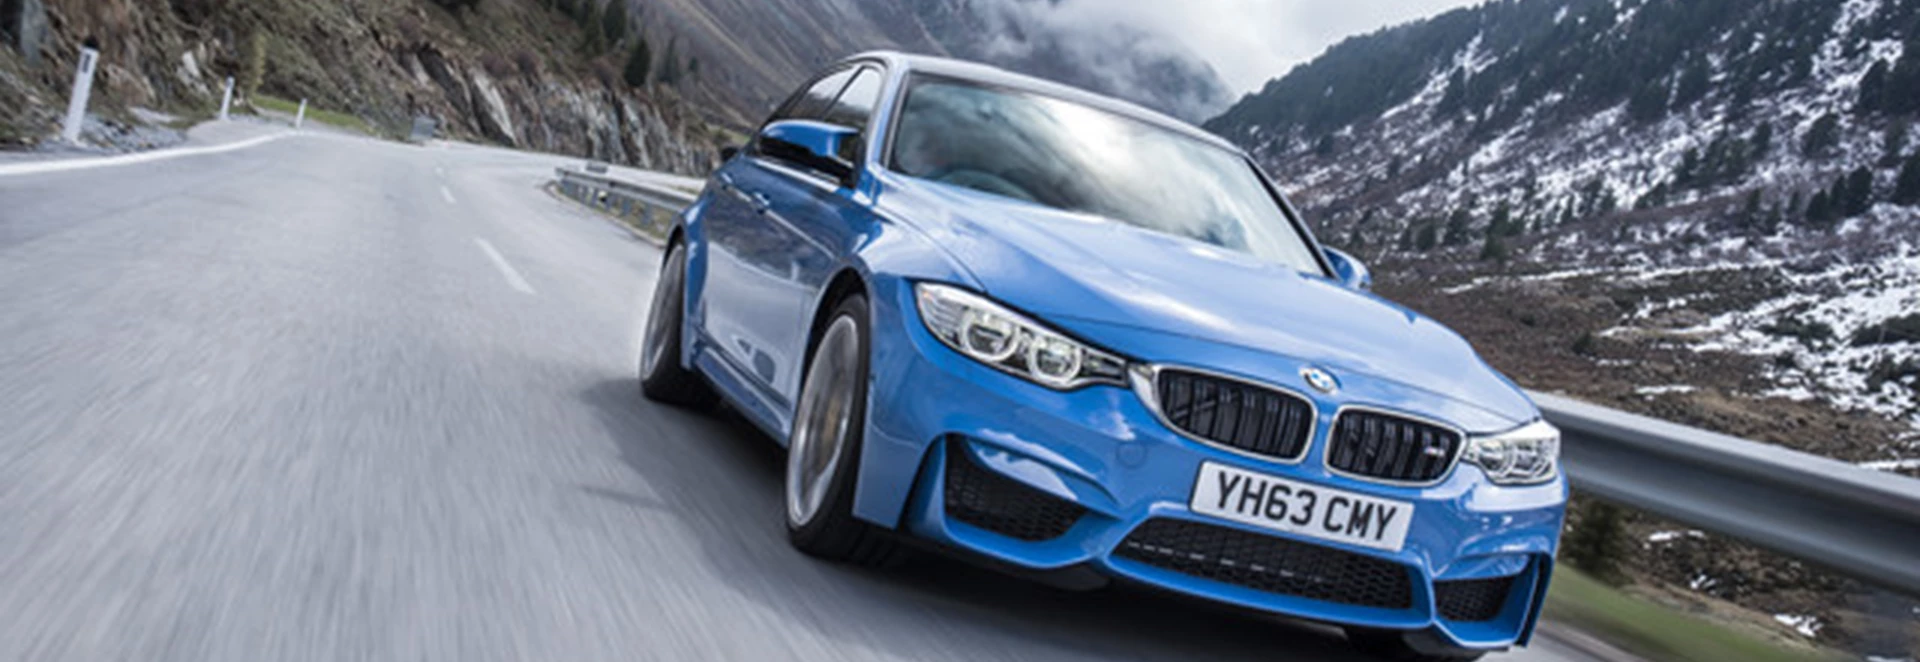 Giant killer or icon gone soft? 5 reasons the BMW M3 is still supersaloon king